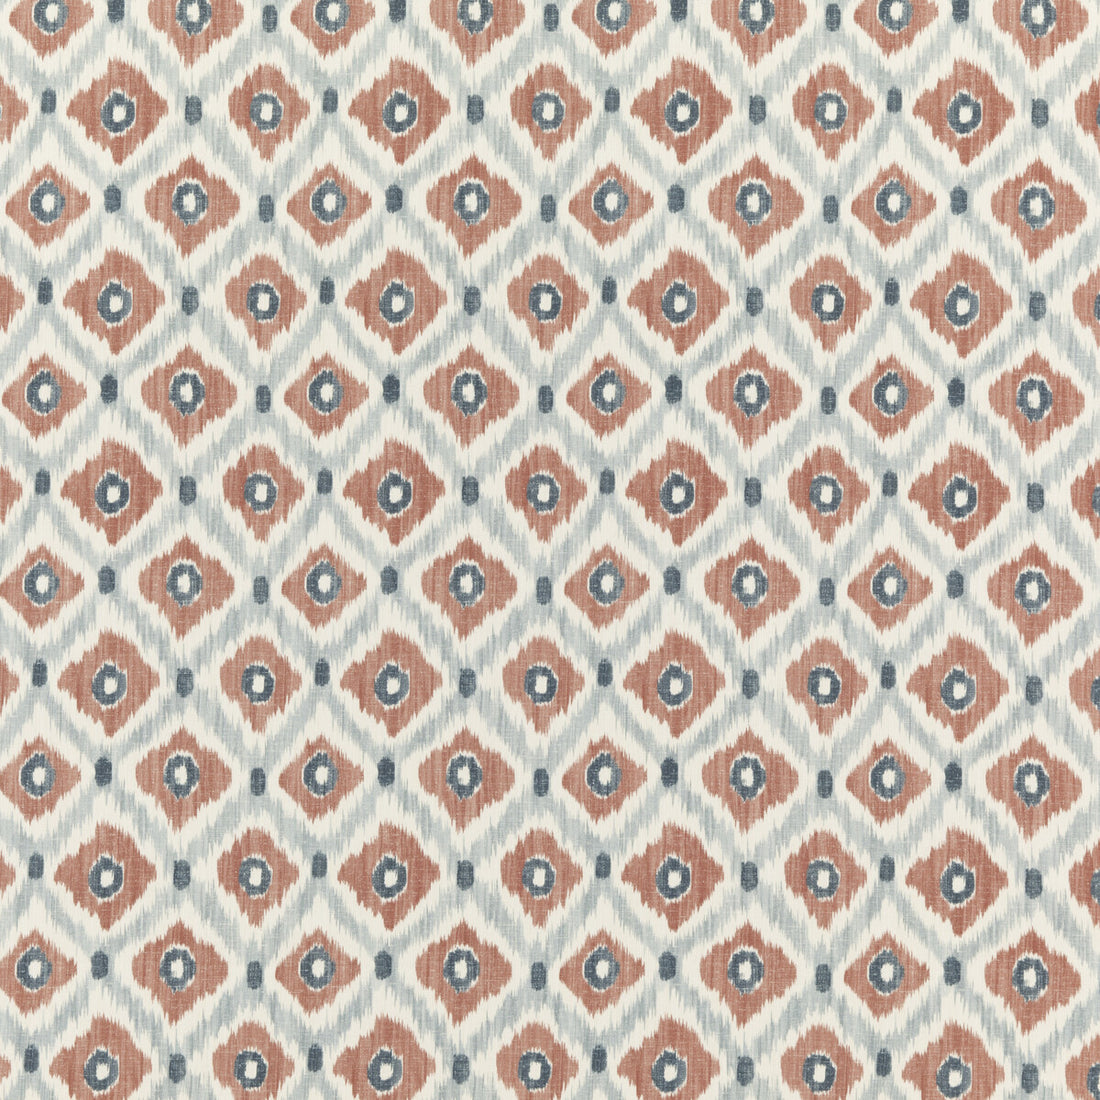 Vasco fabric in indigo/spice color - pattern PP50448.3.0 - by Baker Lifestyle in the Homes &amp; Gardens III collection